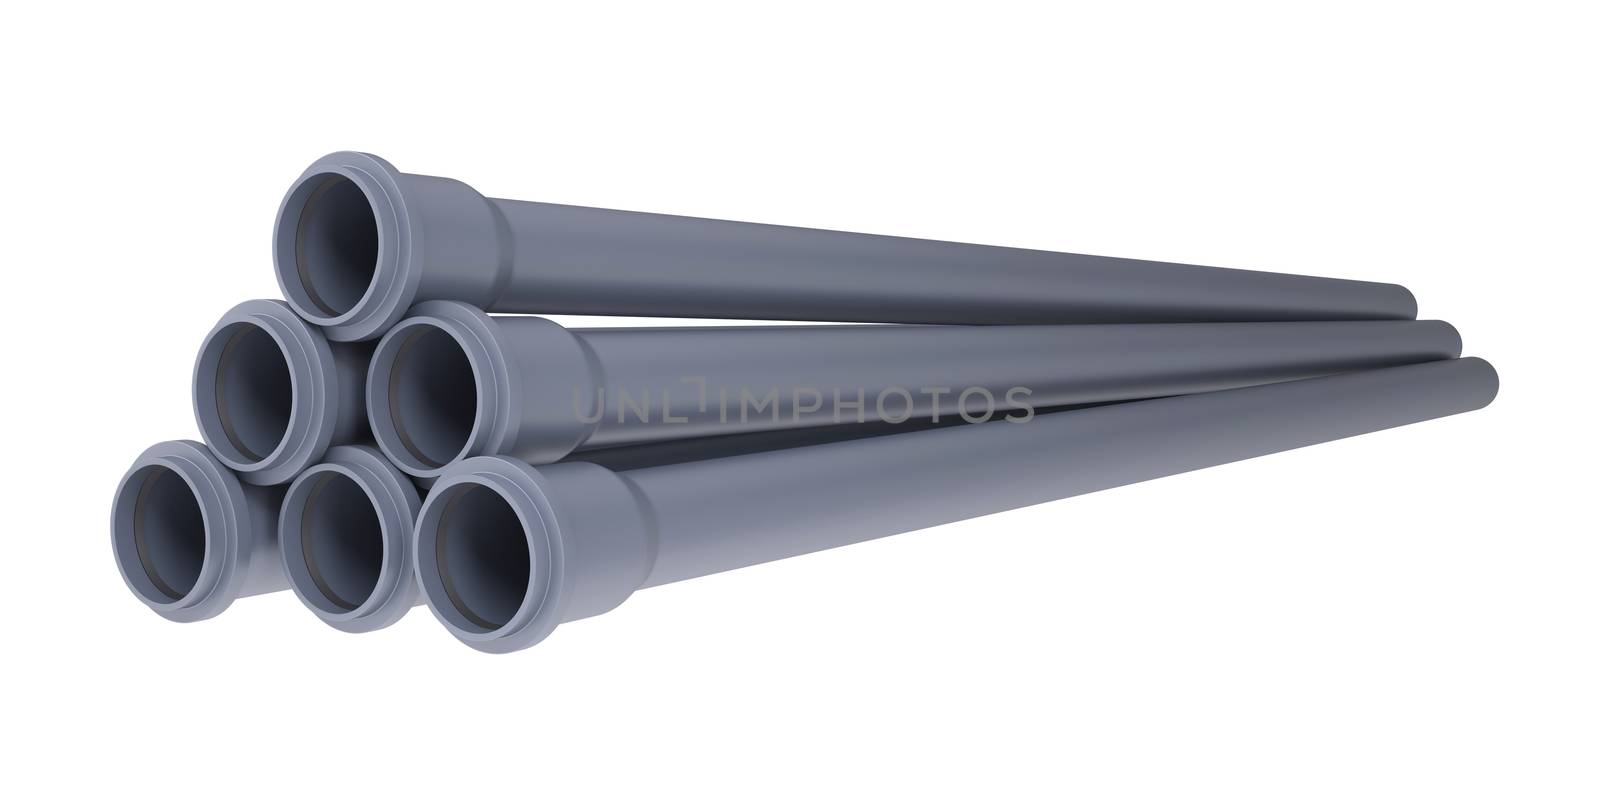 Grey PVC sewer pipes. Isolated render on white background